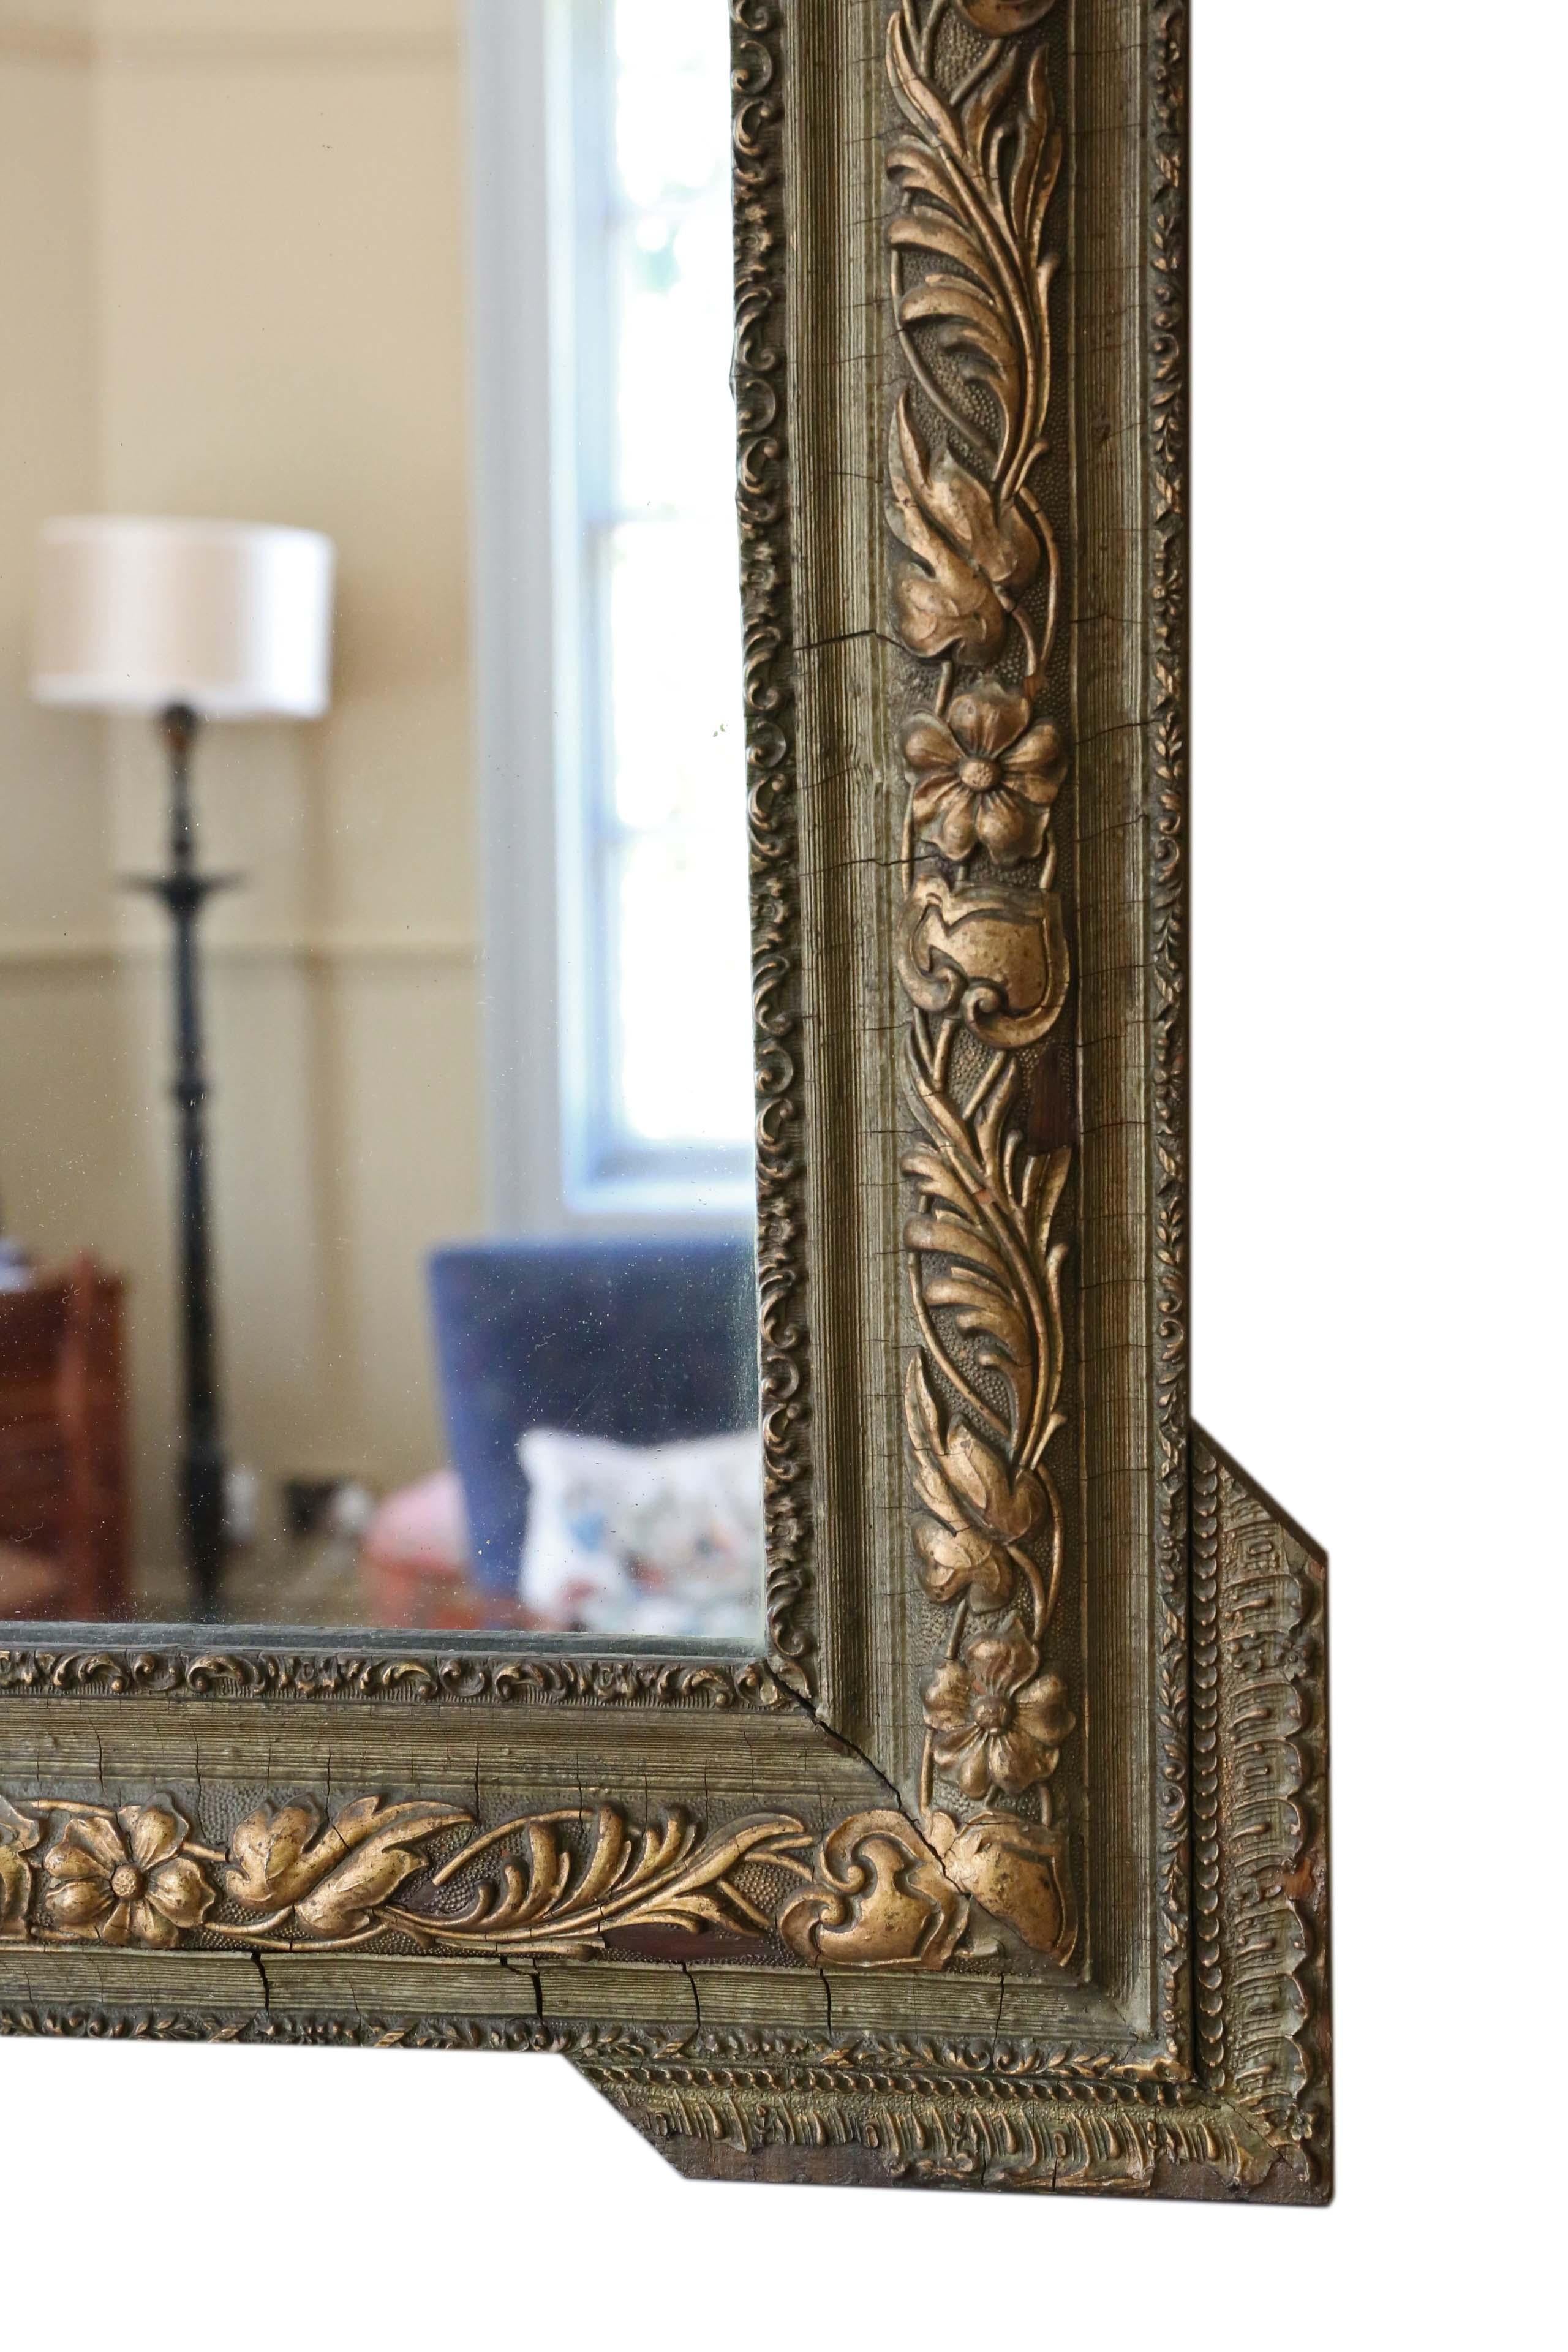 Giltwood Antique Large 19th Century Gilt Overmantle or Wall Mirror